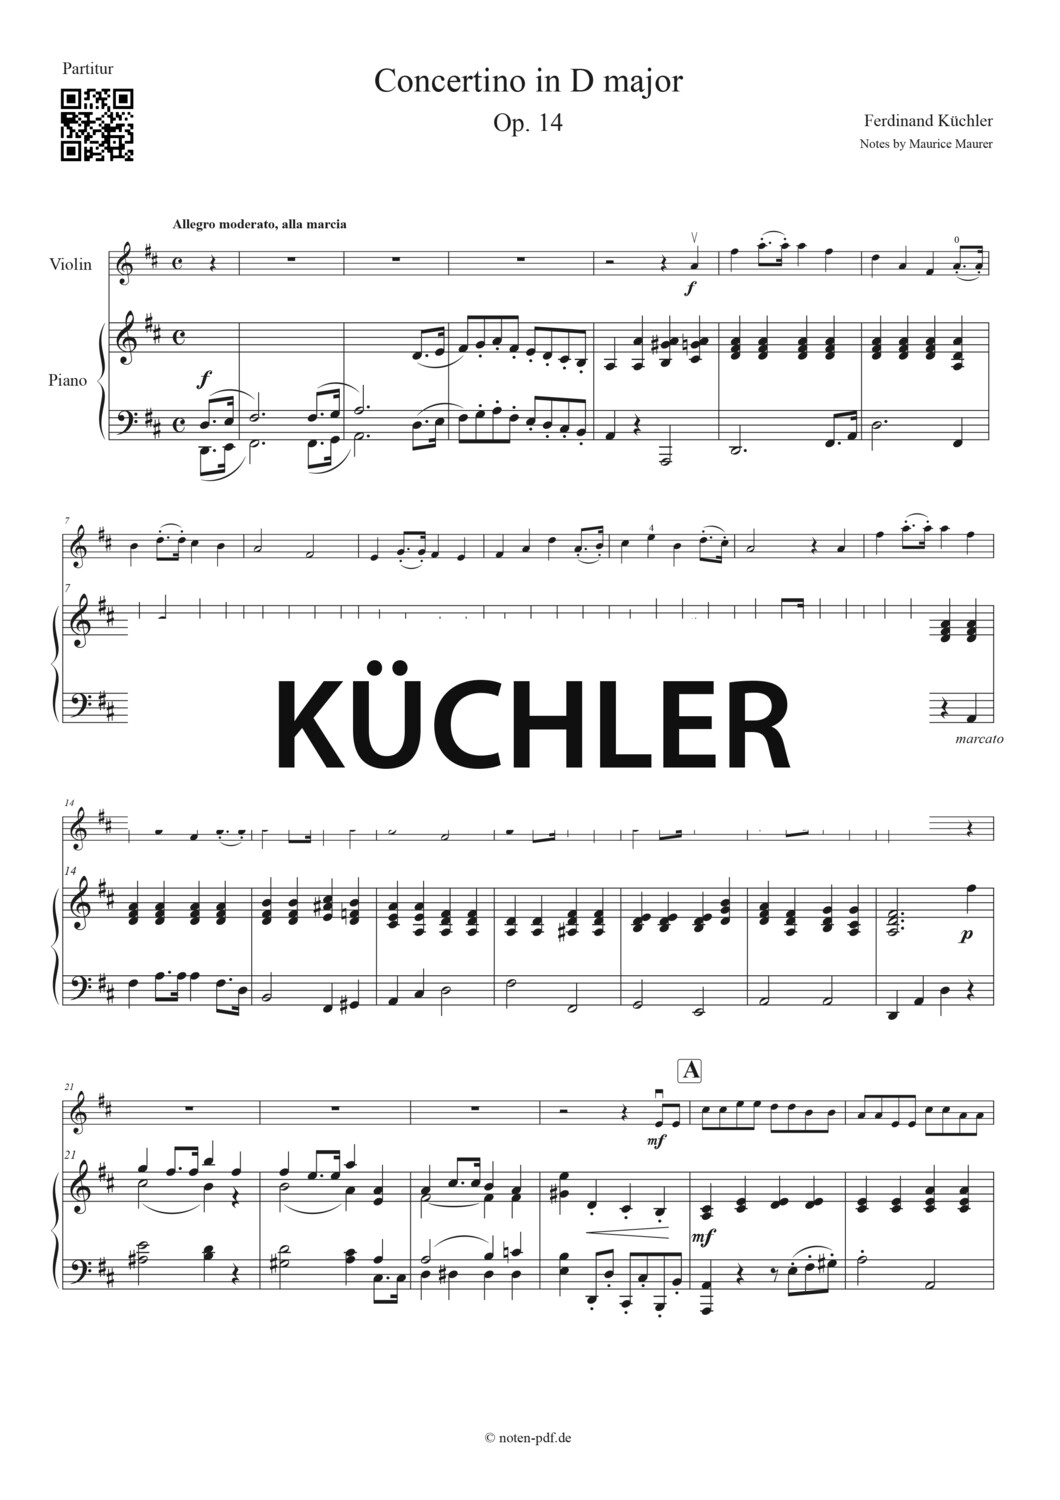 Küchler: Concertino Op. 14 - 3. Movement + MP3